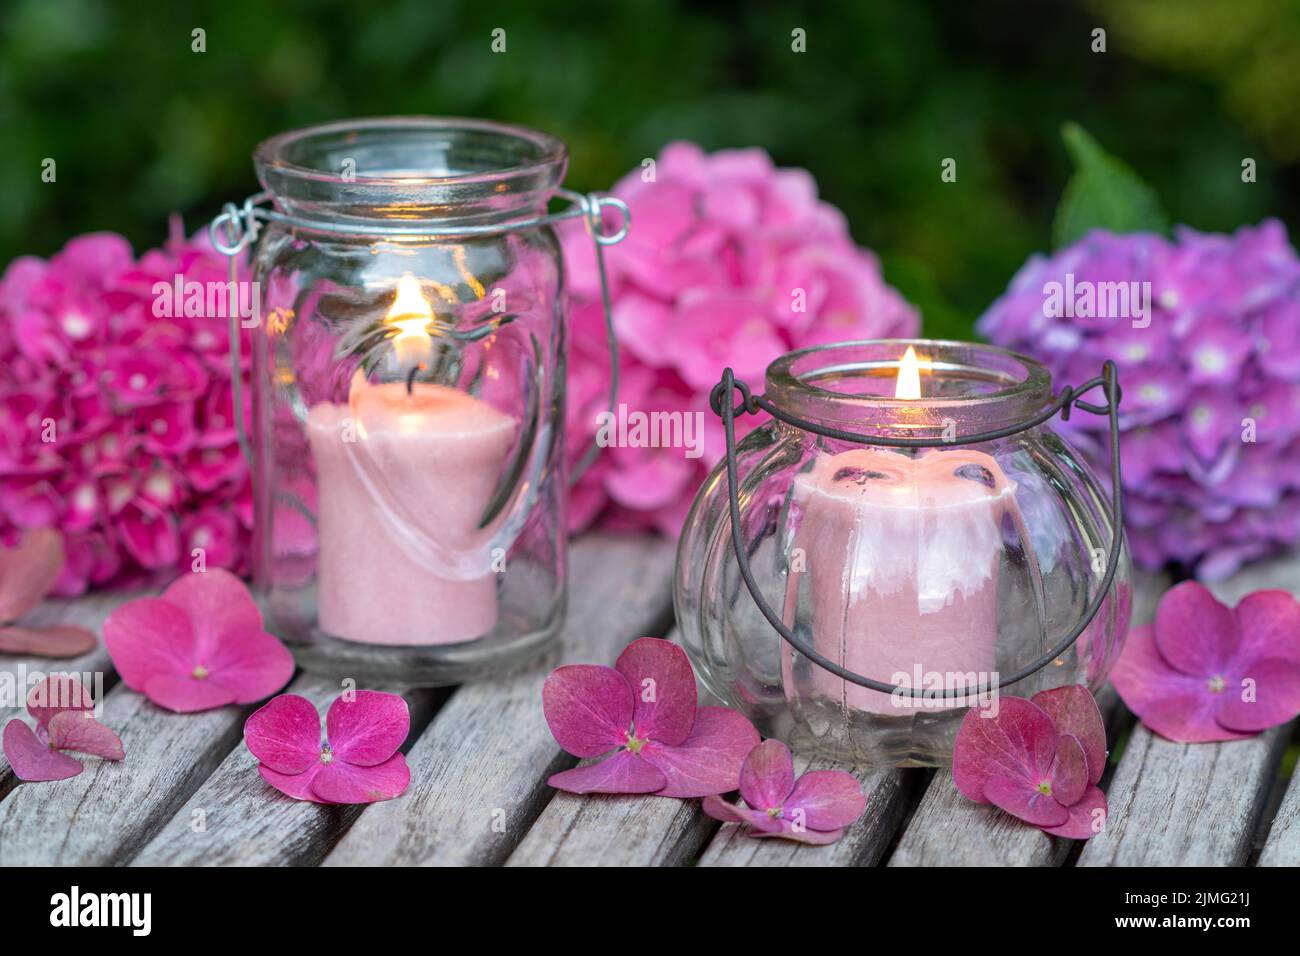 romantic arrangement with candles and pink hydrangea flowers Stock Photo